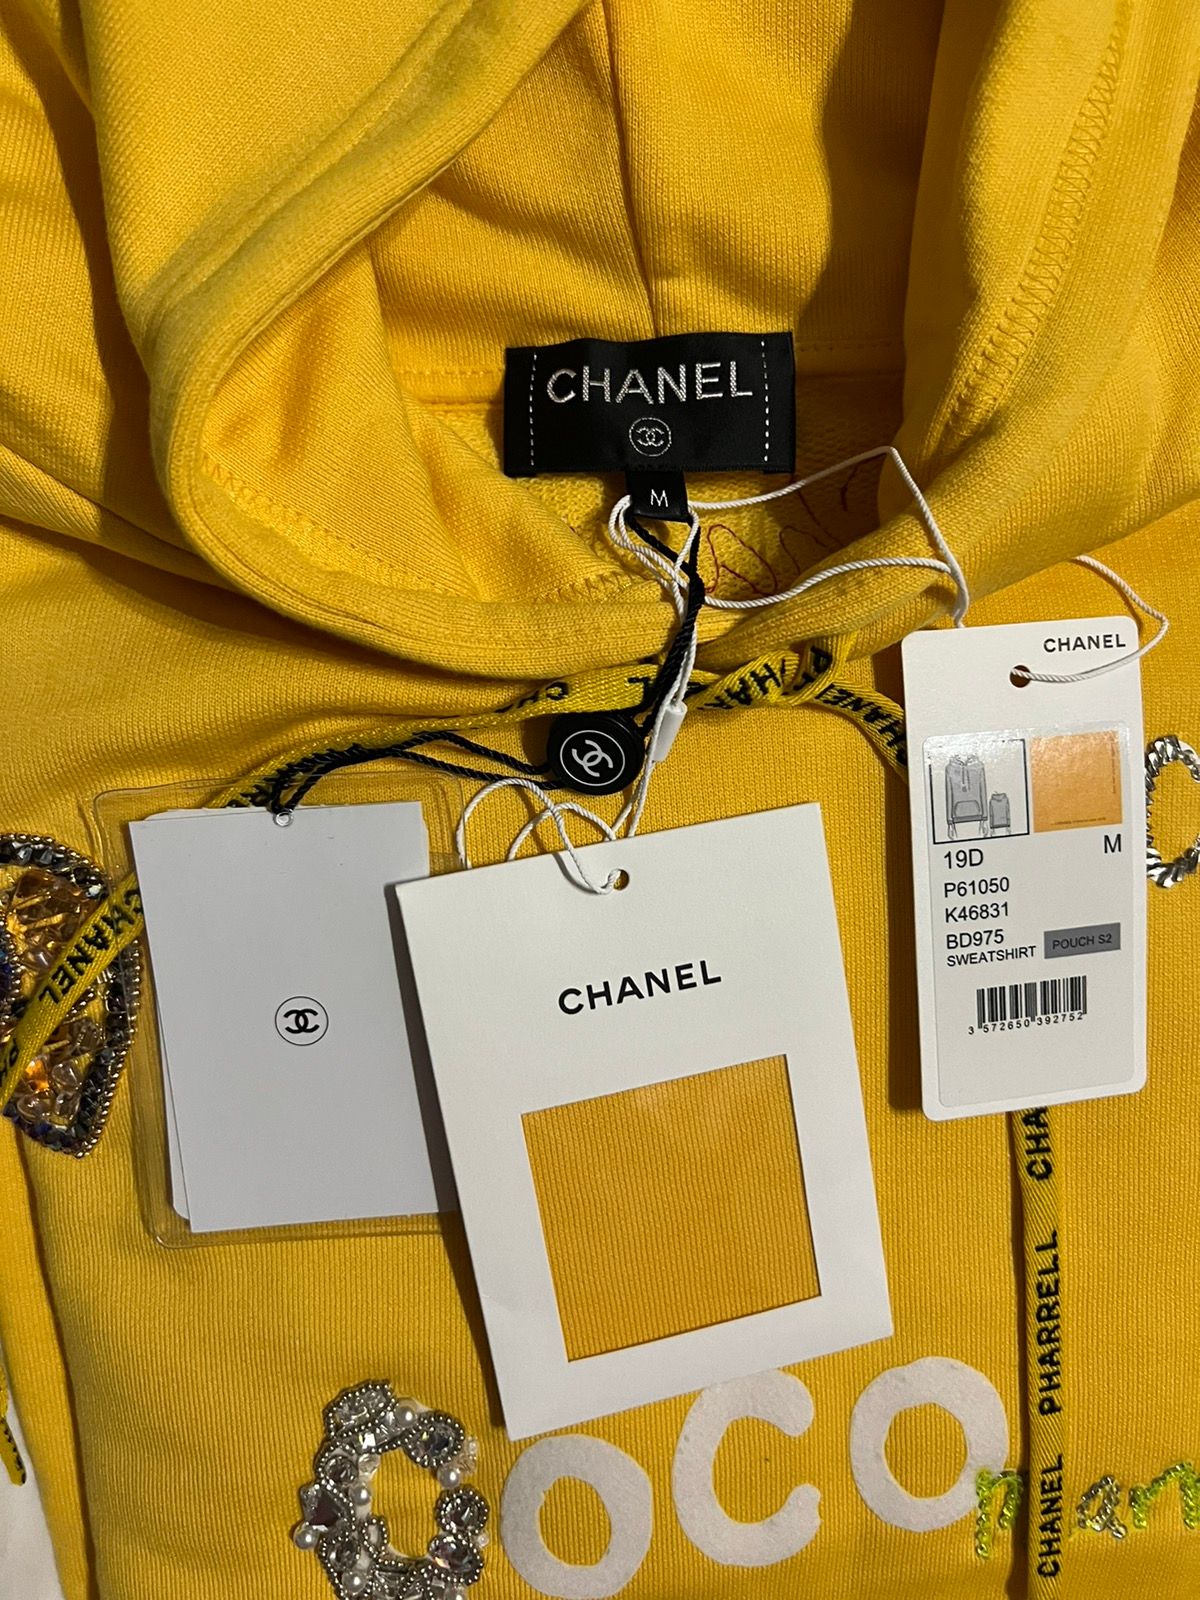 Chanel Chanel x Pharrell yellow hoodie size M limited edition